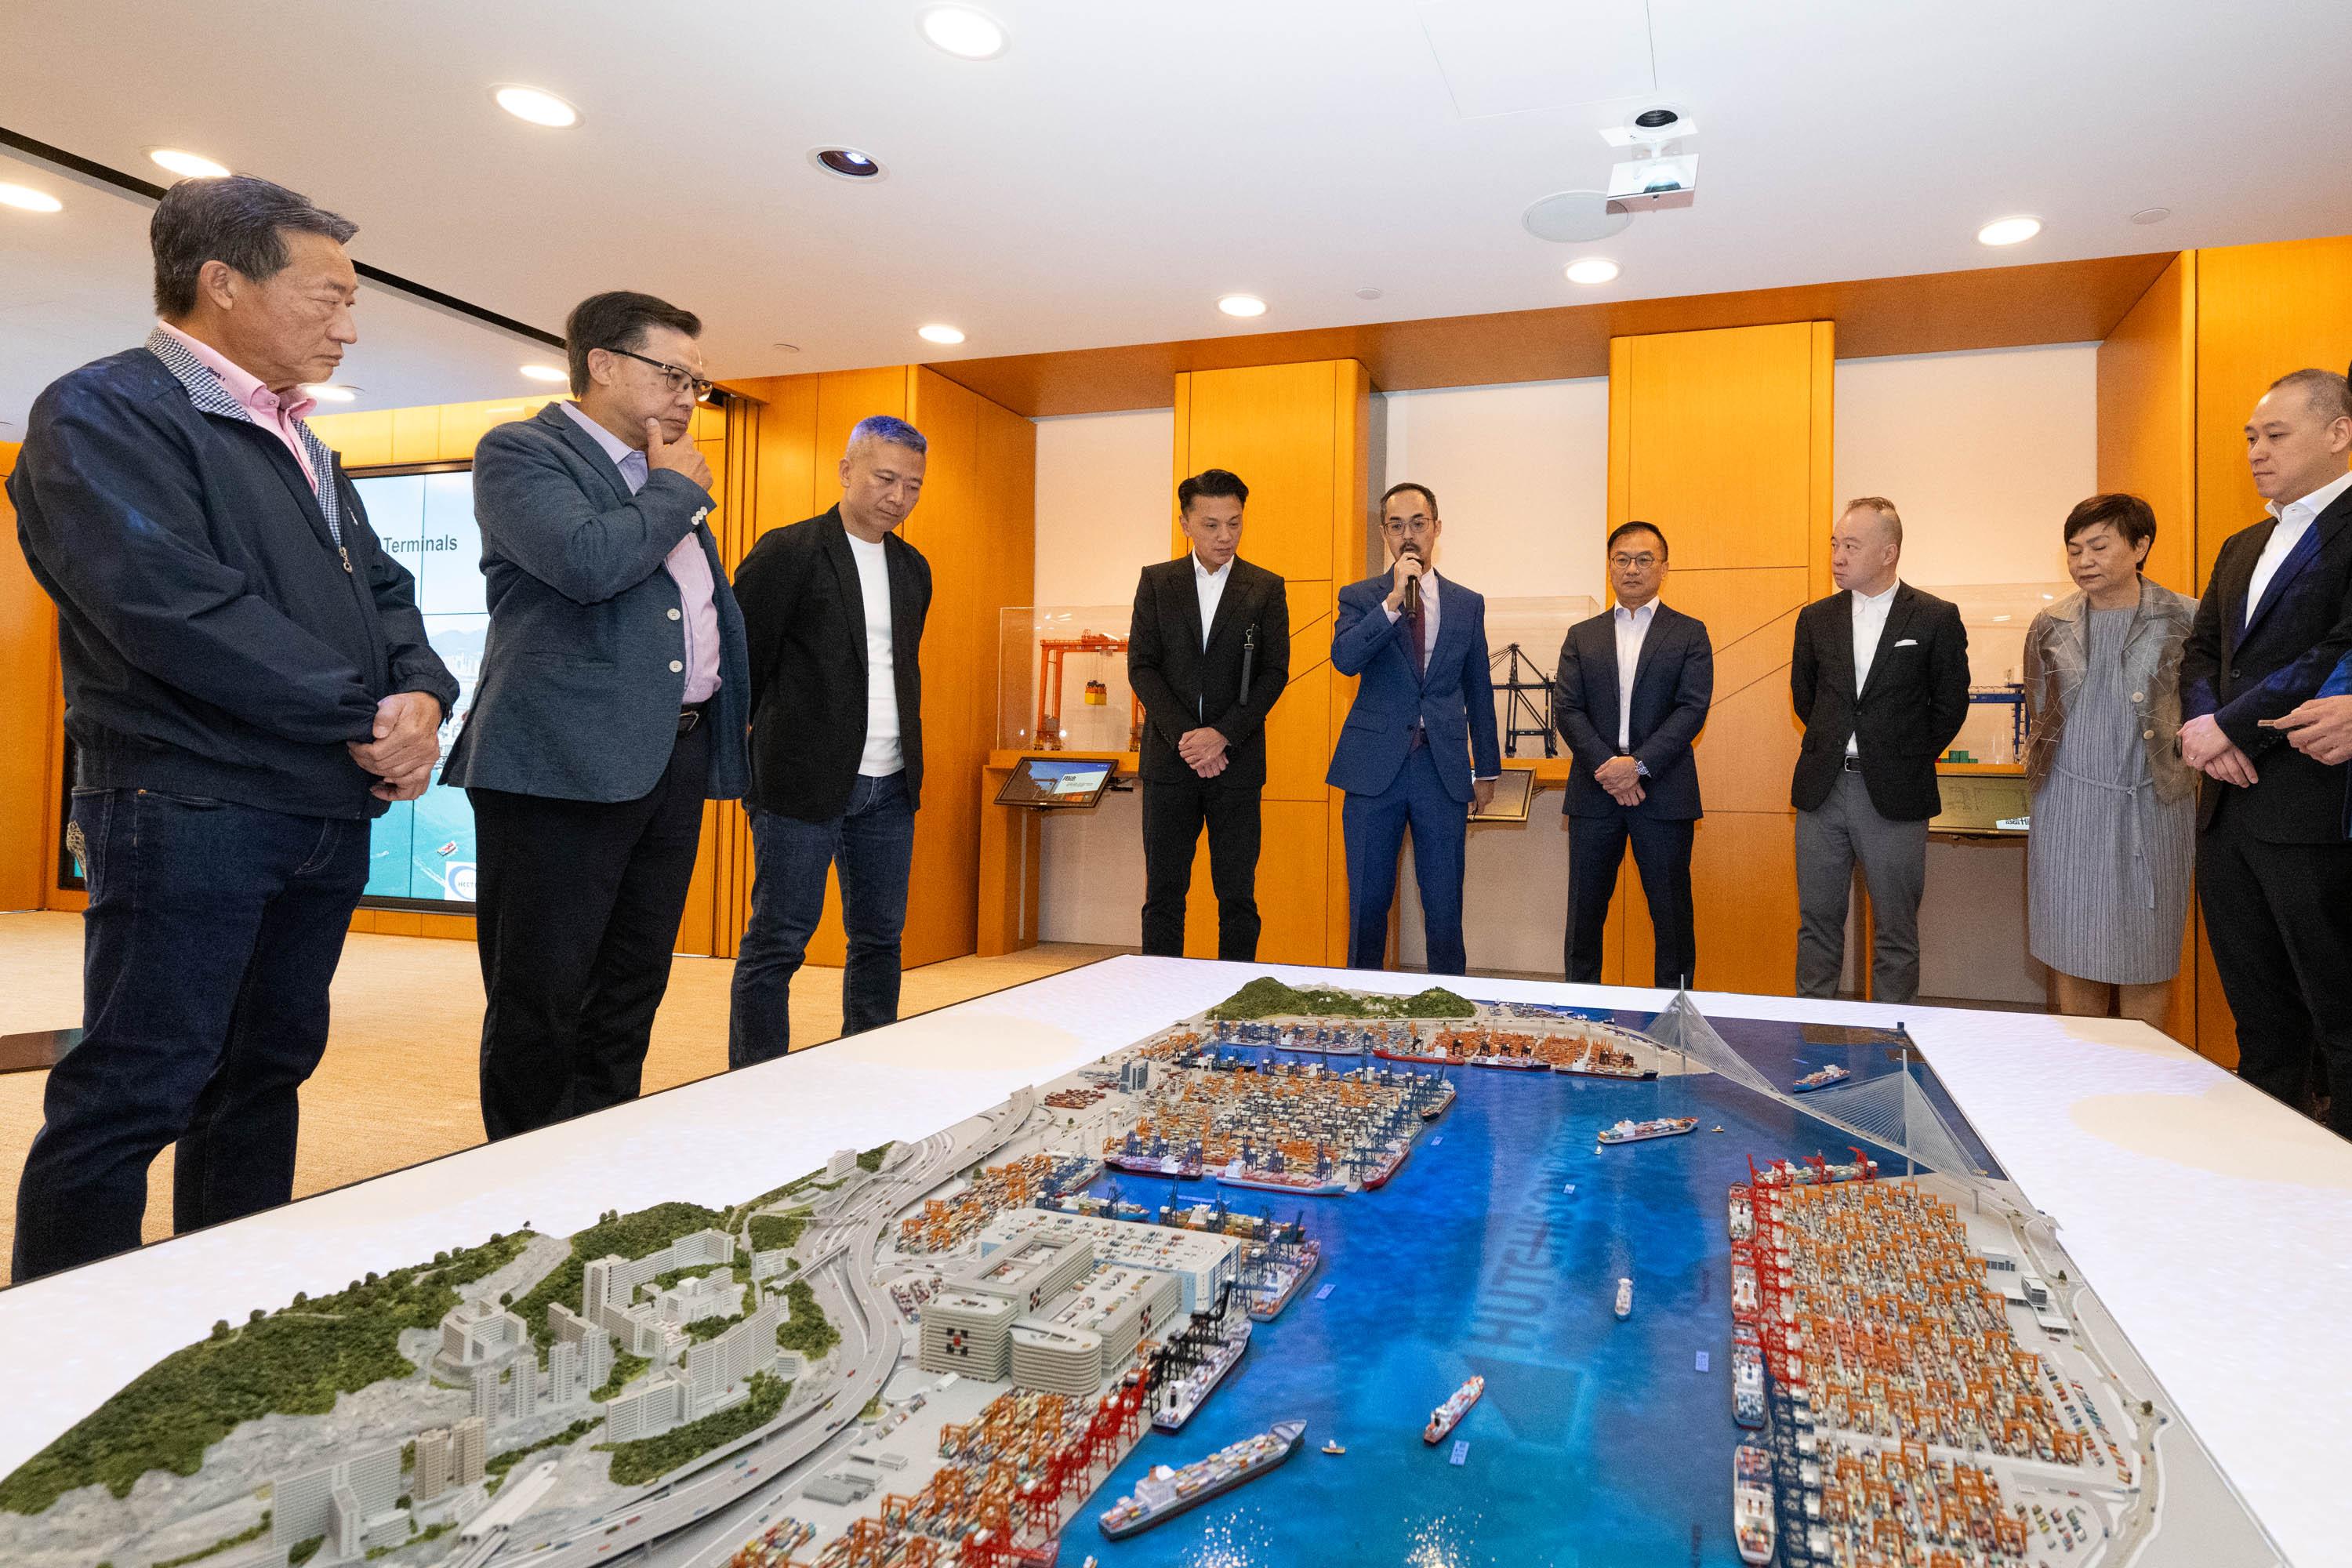 The Legislative Council (LegCo) Panel on Economic Development visited the Kwai Tsing Container Terminals (KTCT) today (November 7) to further understand the latest developments of the terminals' digital operations and the logistics industry. Photo shows the Chairman of the Panel on Economic Development, Mr Sunny Tan (fourth left), and other Members receiving a briefing on port operations.